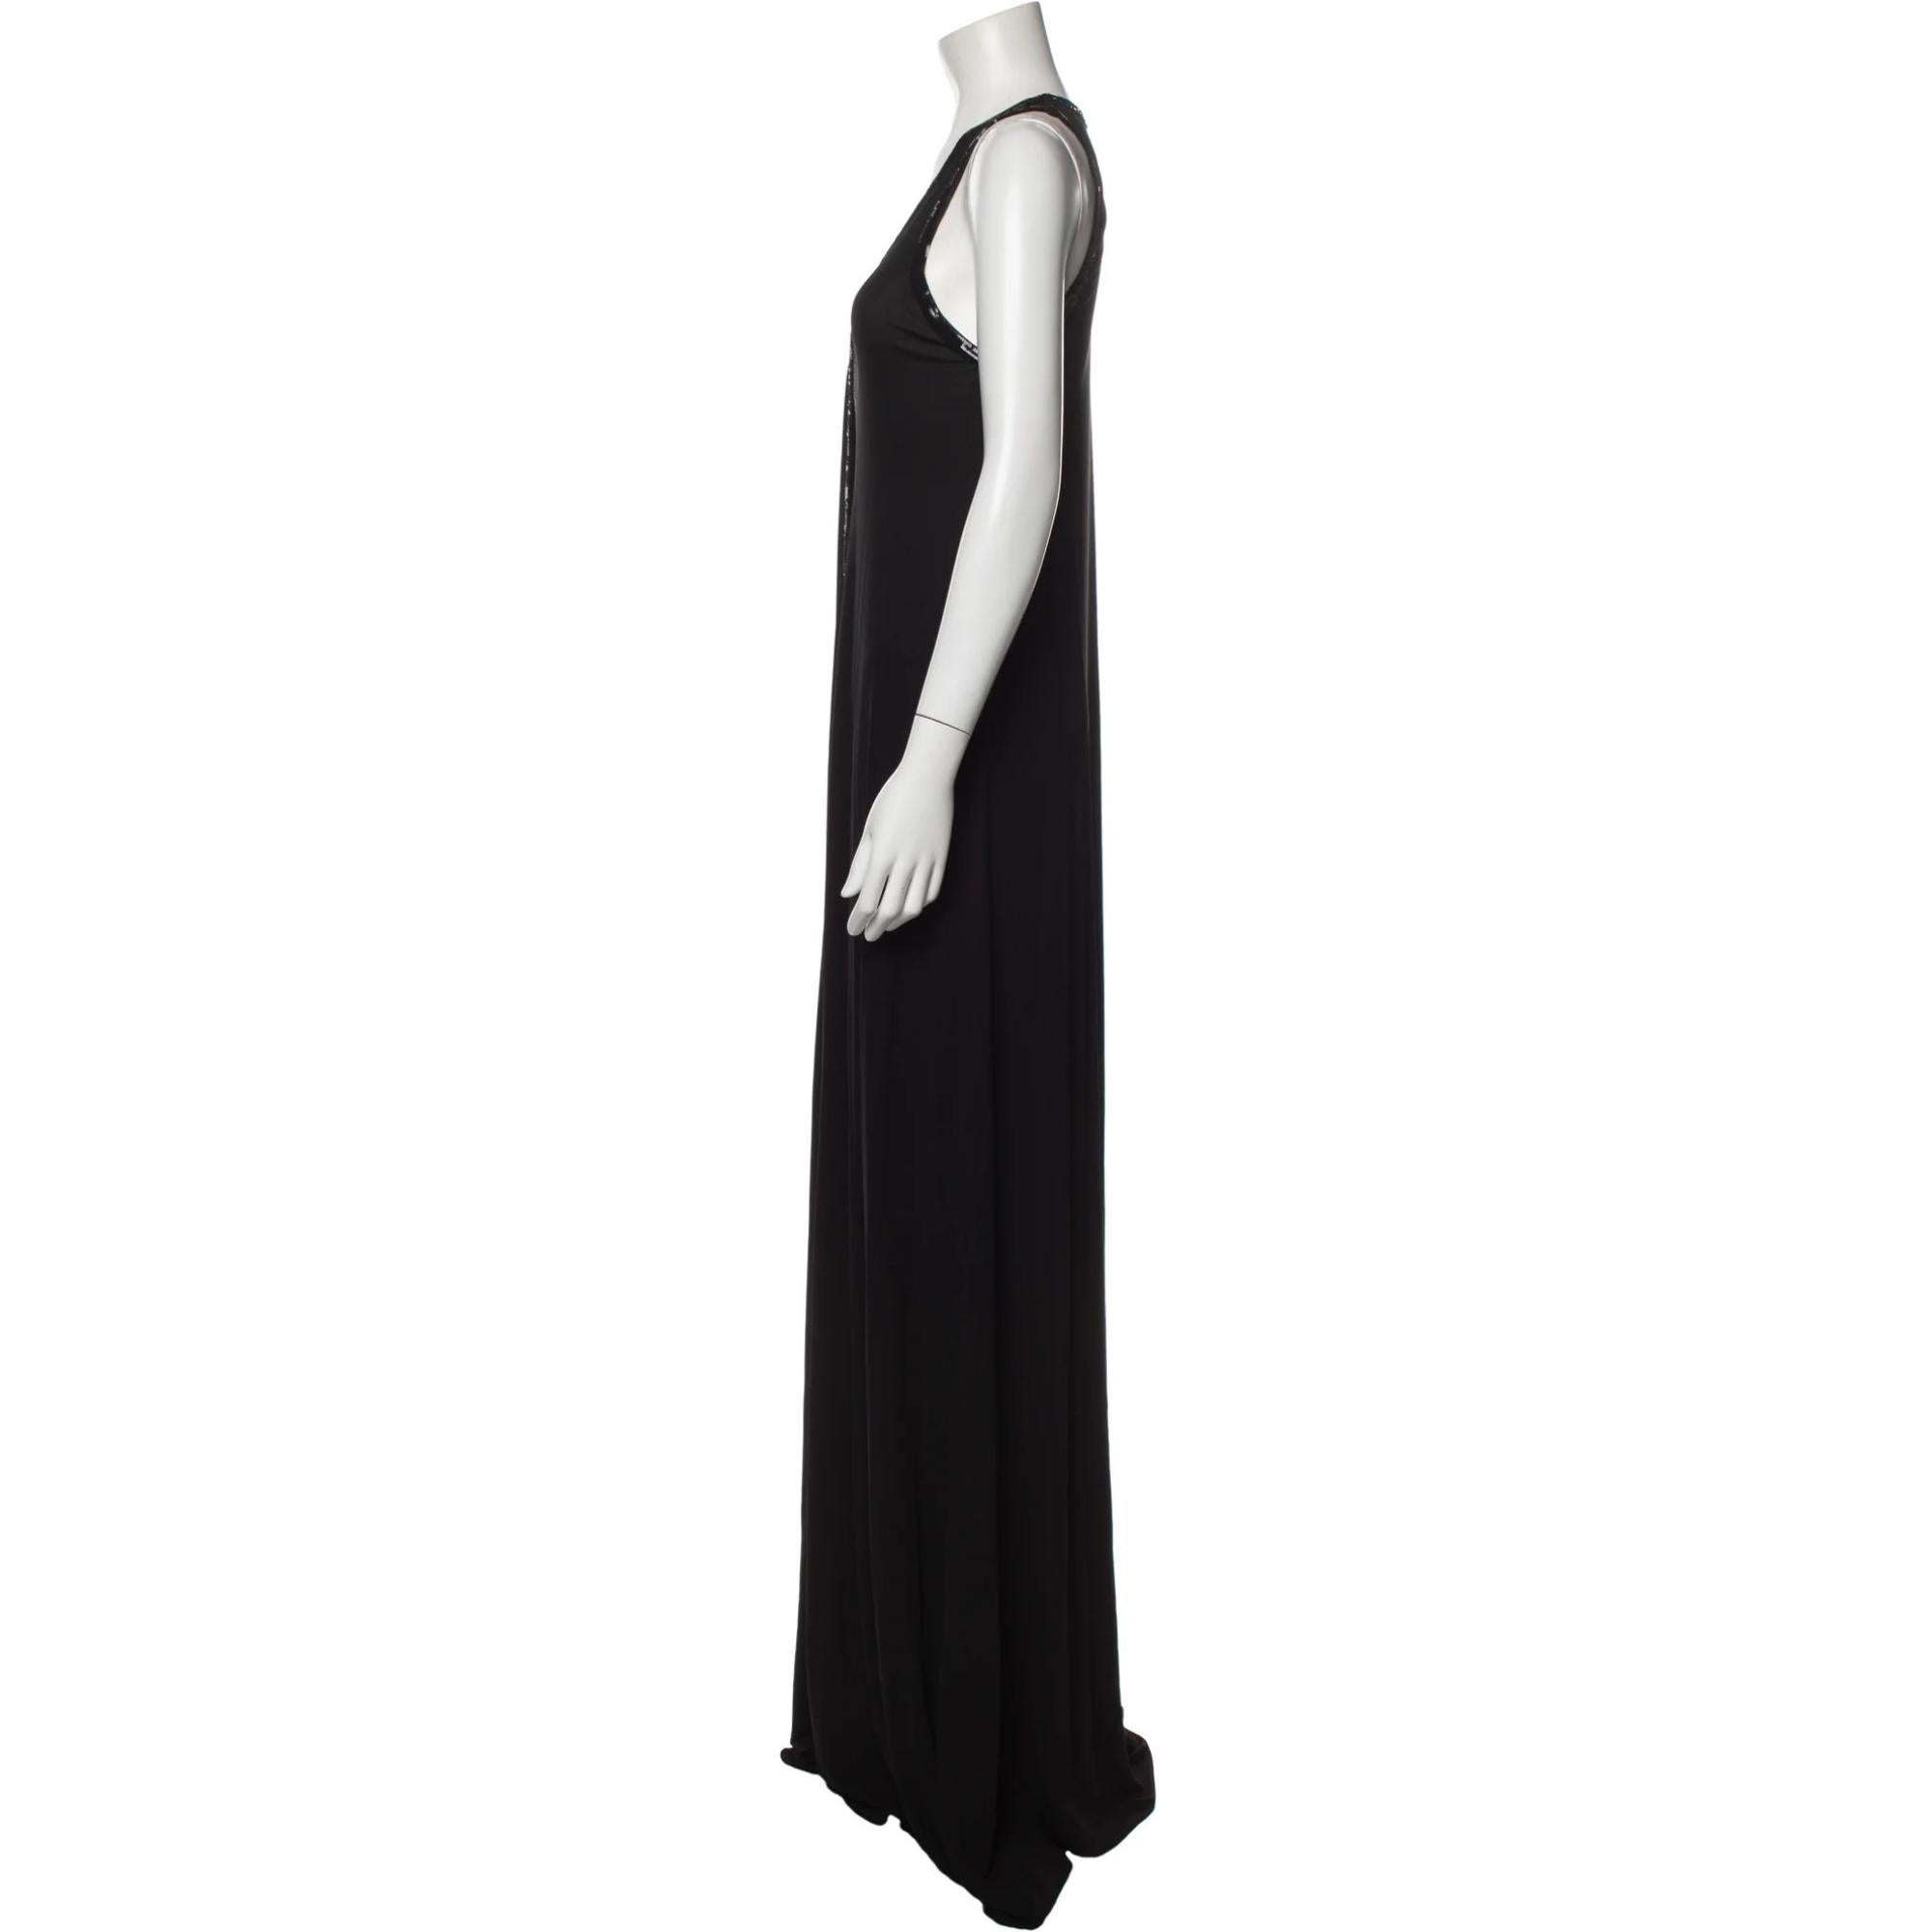 Jean Paul Gaultier Evening Gown. Vintage. From the 2000's Collection by Jean Paul Gaultier. Black. Sequin Embellishments. Long Sleeve with Scoop Neck. Sash-Tie Closure at Front. Designer Fit: Dresses by Jean Paul Gaultier are typically designed for